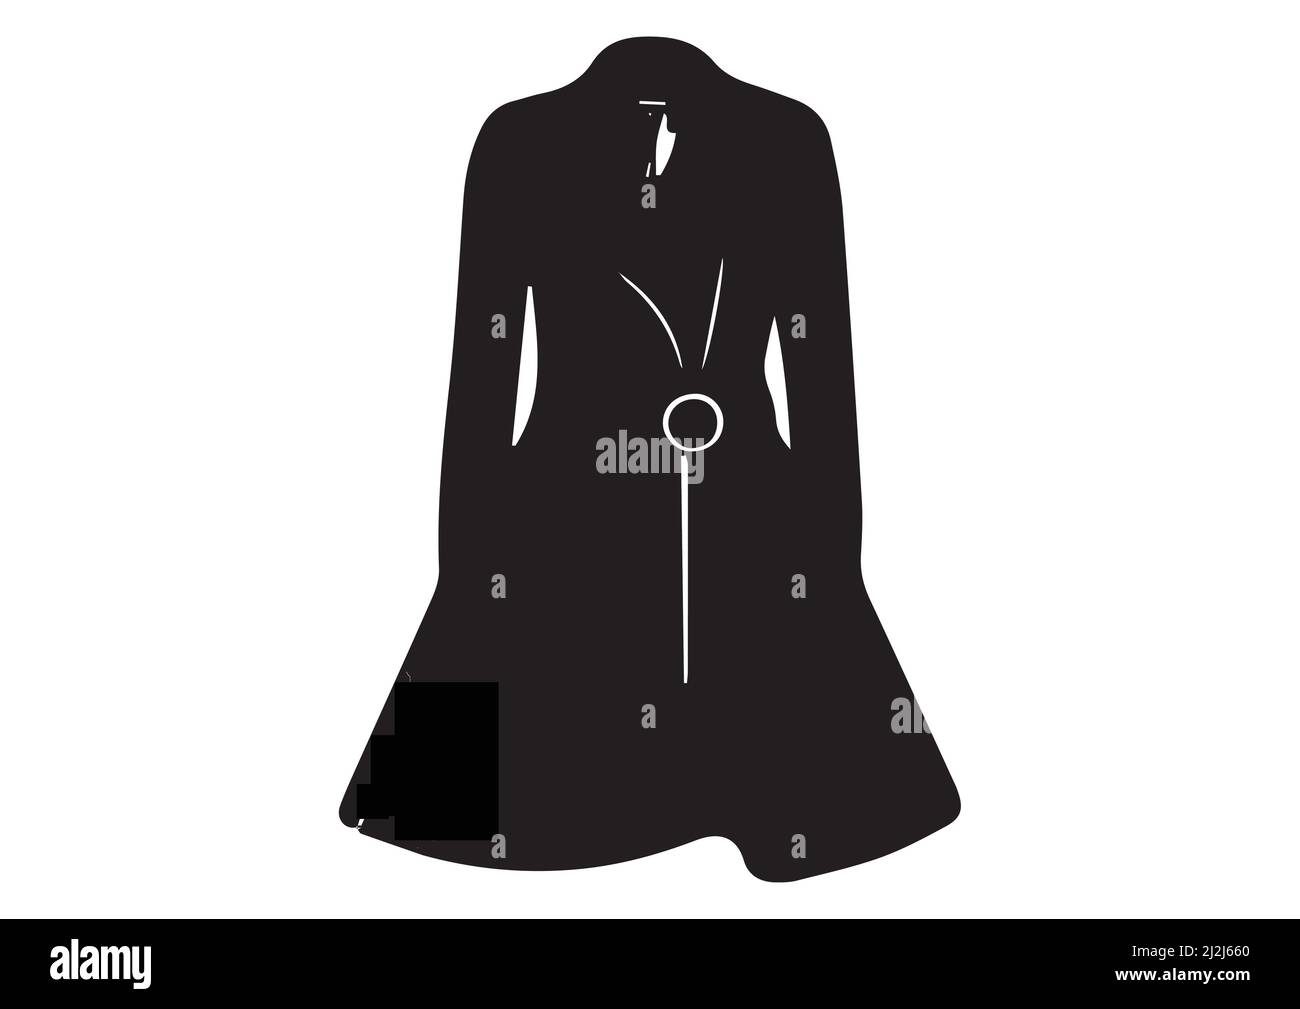 illustration of heavy winter coats for women's clothing fashion in vector art work ladies warm winter blazer fashion shadow clothing wear collection Stock Vector